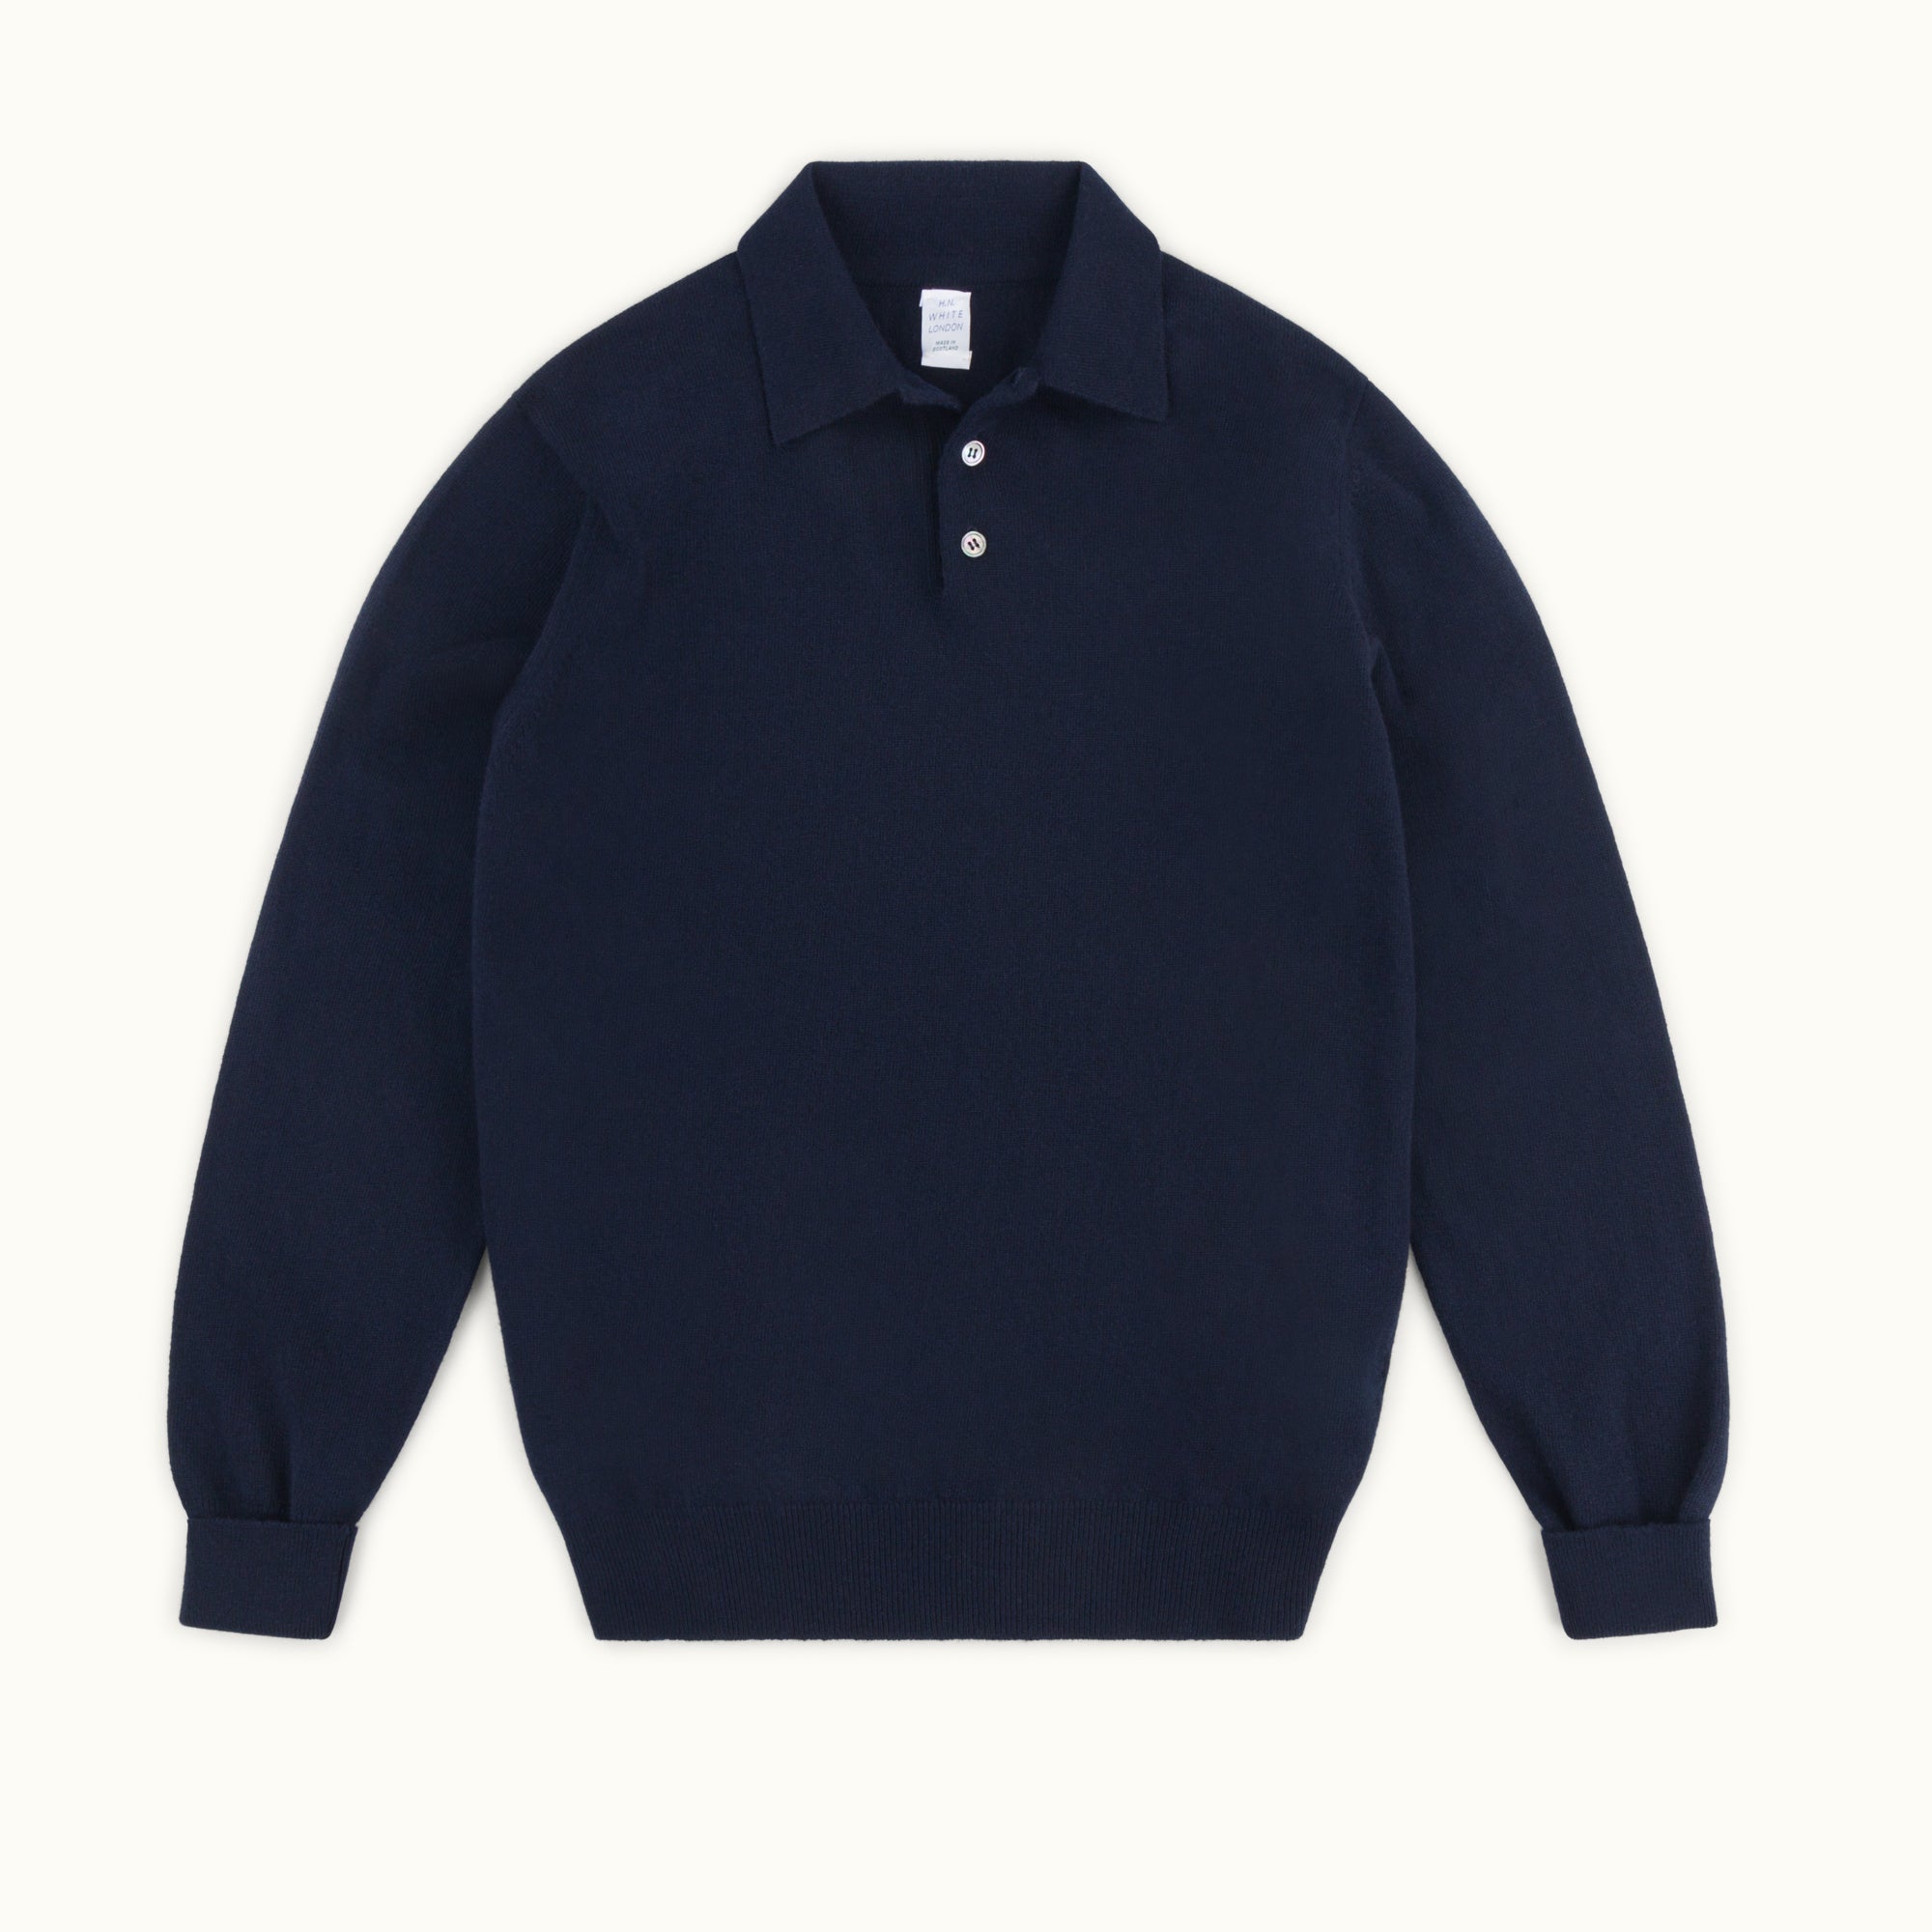 Navy Blue Geelong Knitted Polo